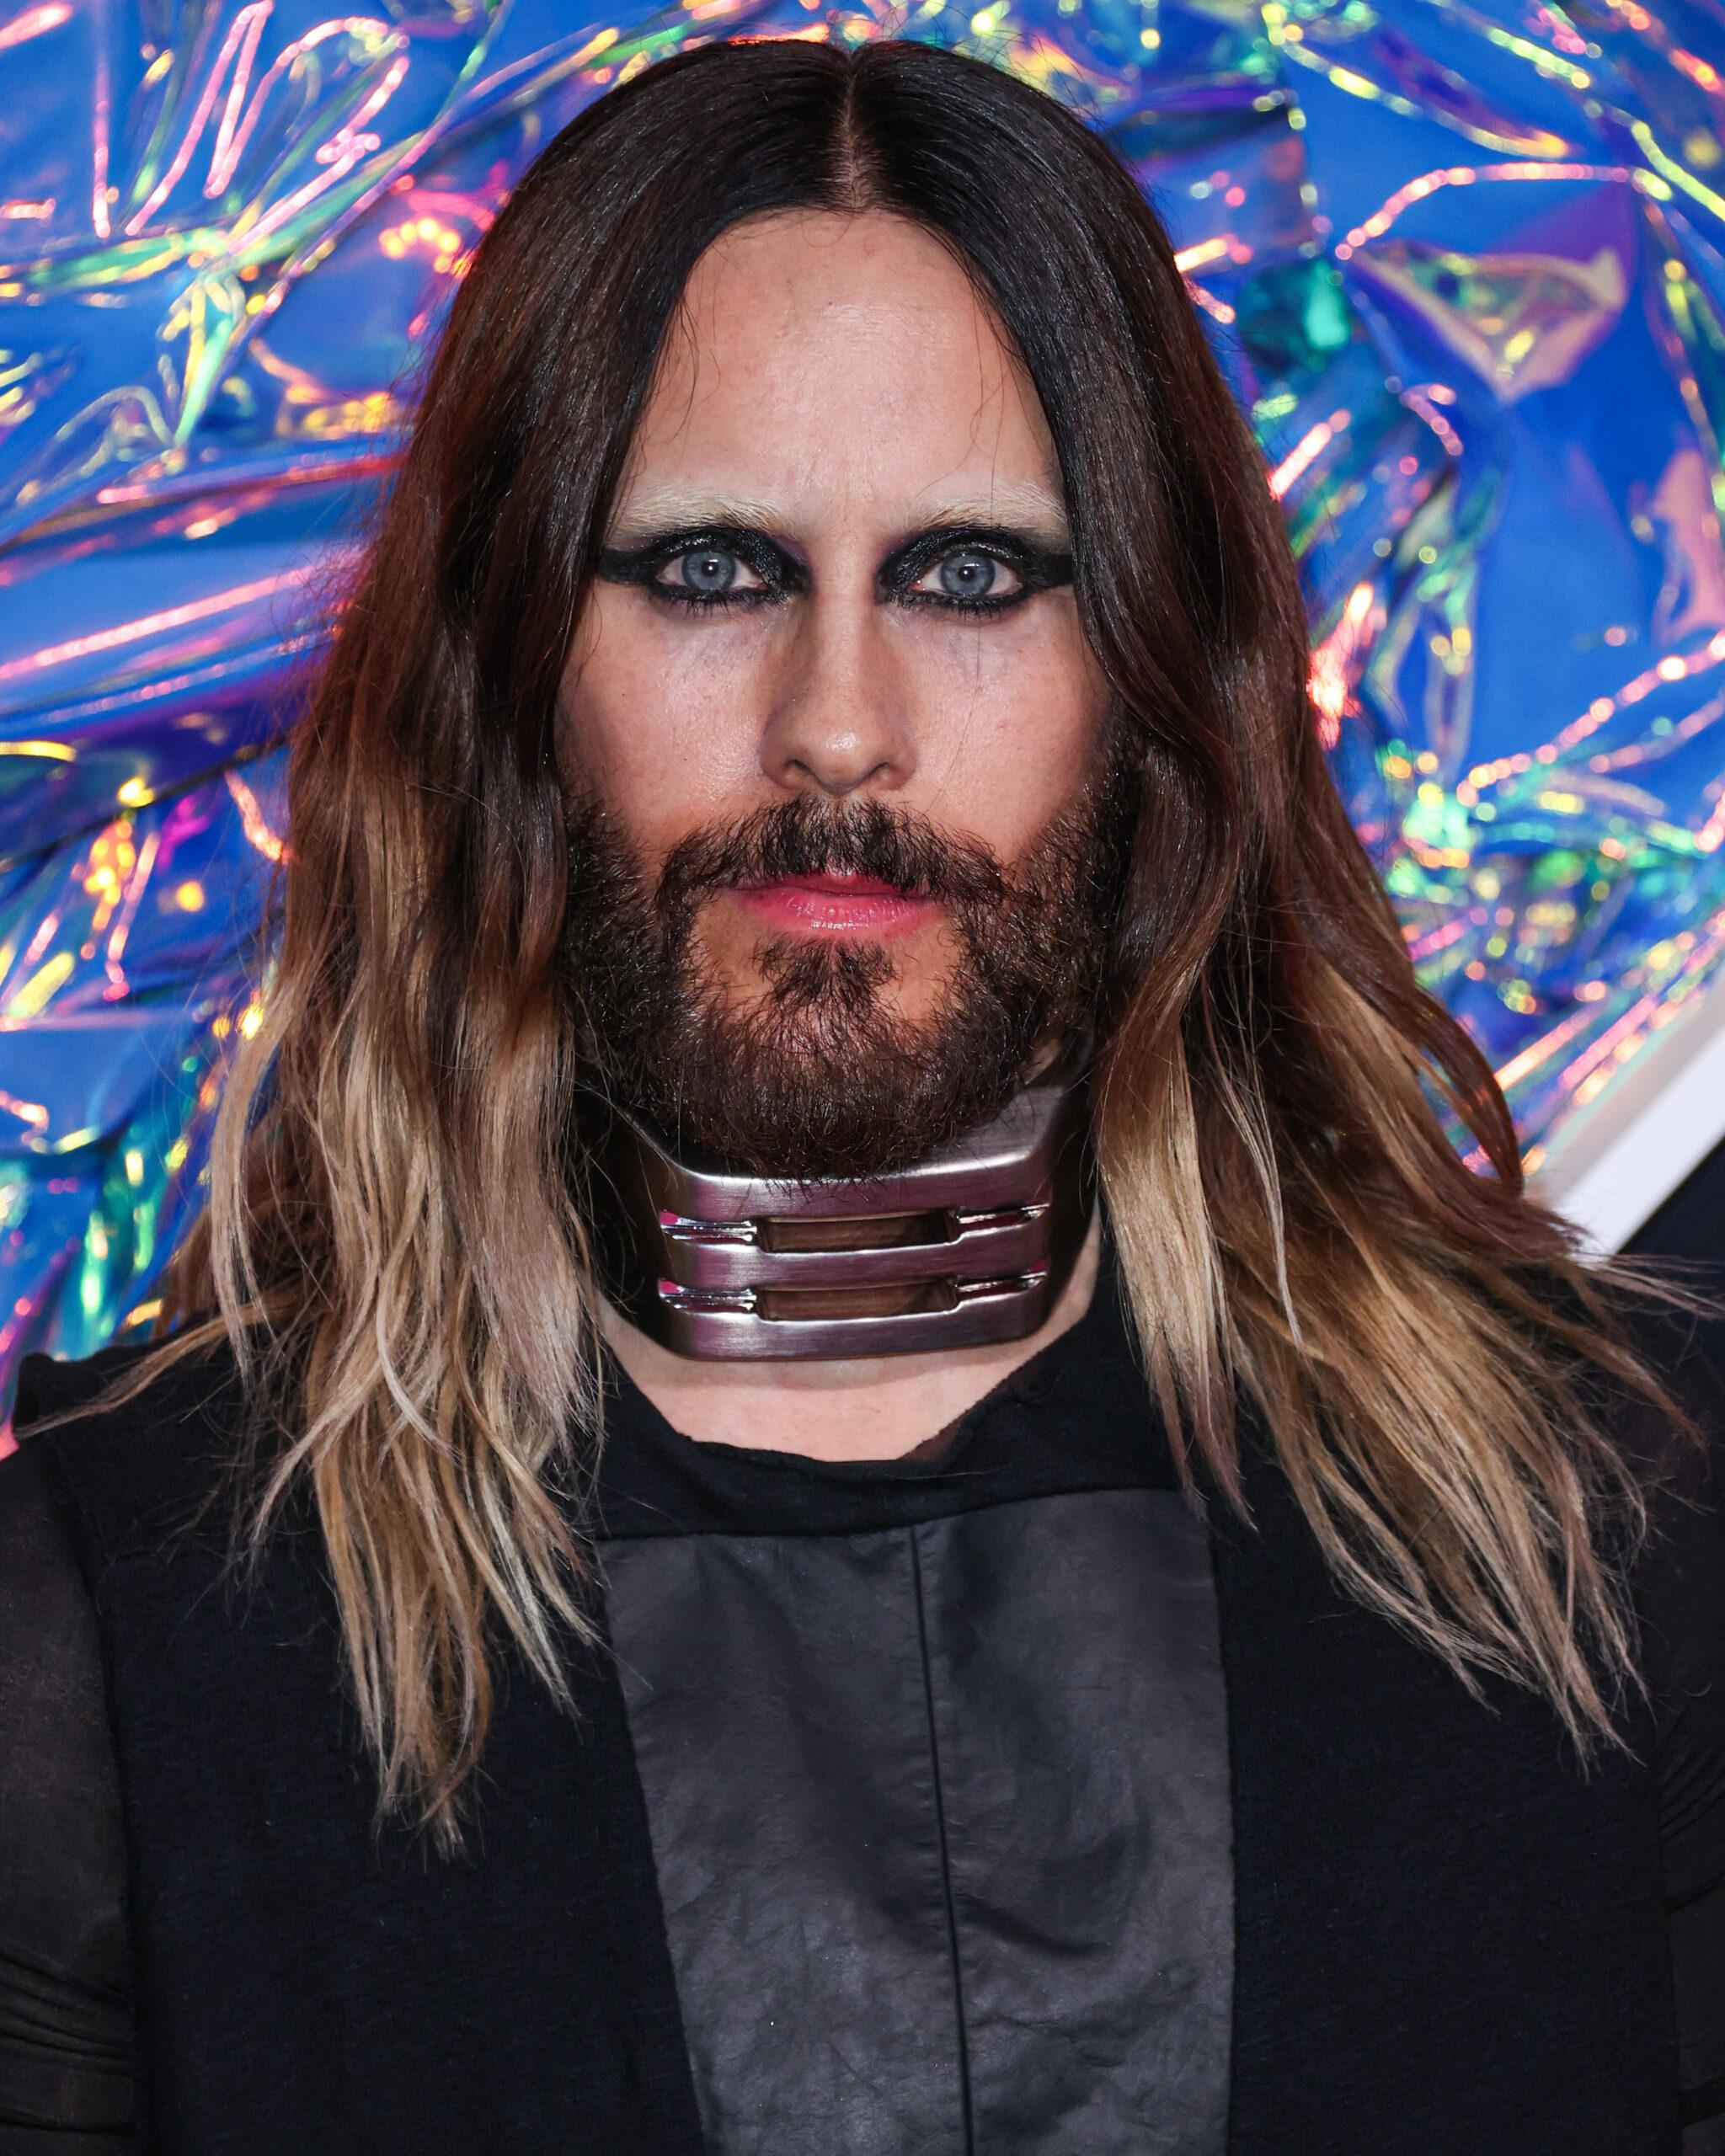 Jared Leto Reveals 'An Epiphany' He Had That Led To His Sobriety After Being A 'Professional Drug User'